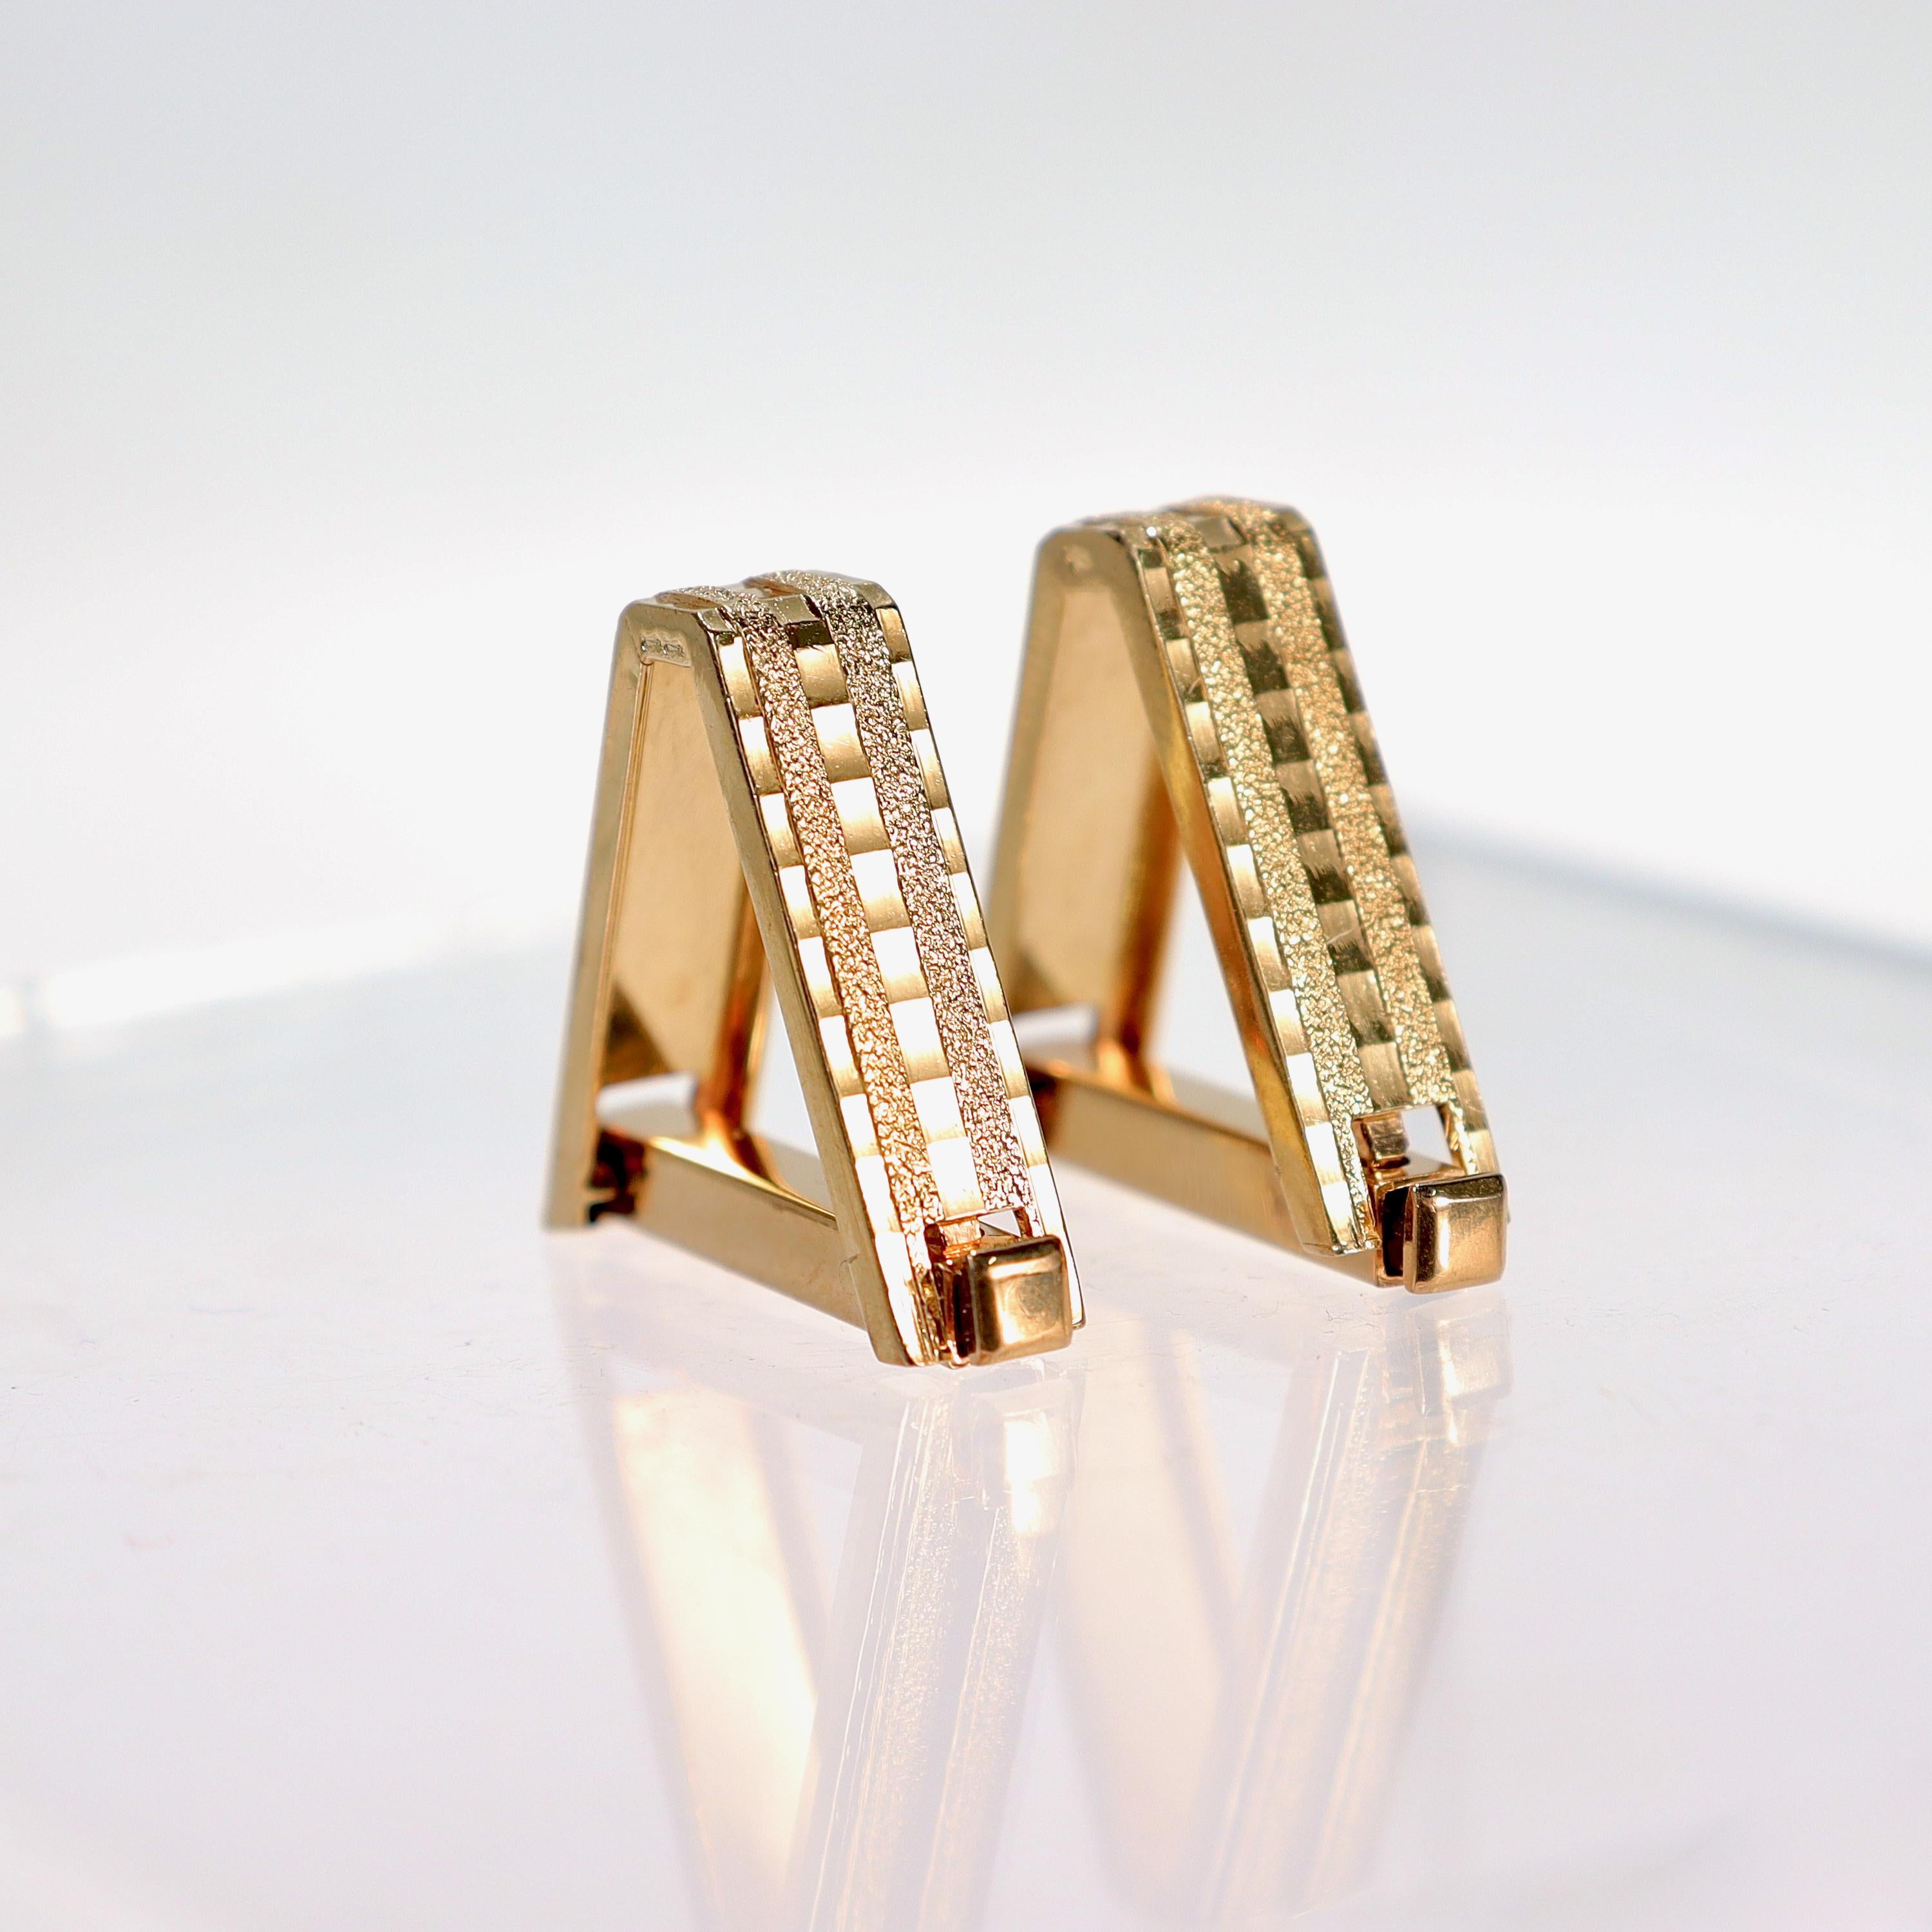 A very fine pair of high karat French gold cufflinks.

With triangular formed cufflinks with an engine turned striped pattern to the sides that wrap around the cuff.

With a box clasp for extra security.

Struck with an French hallmarks and a